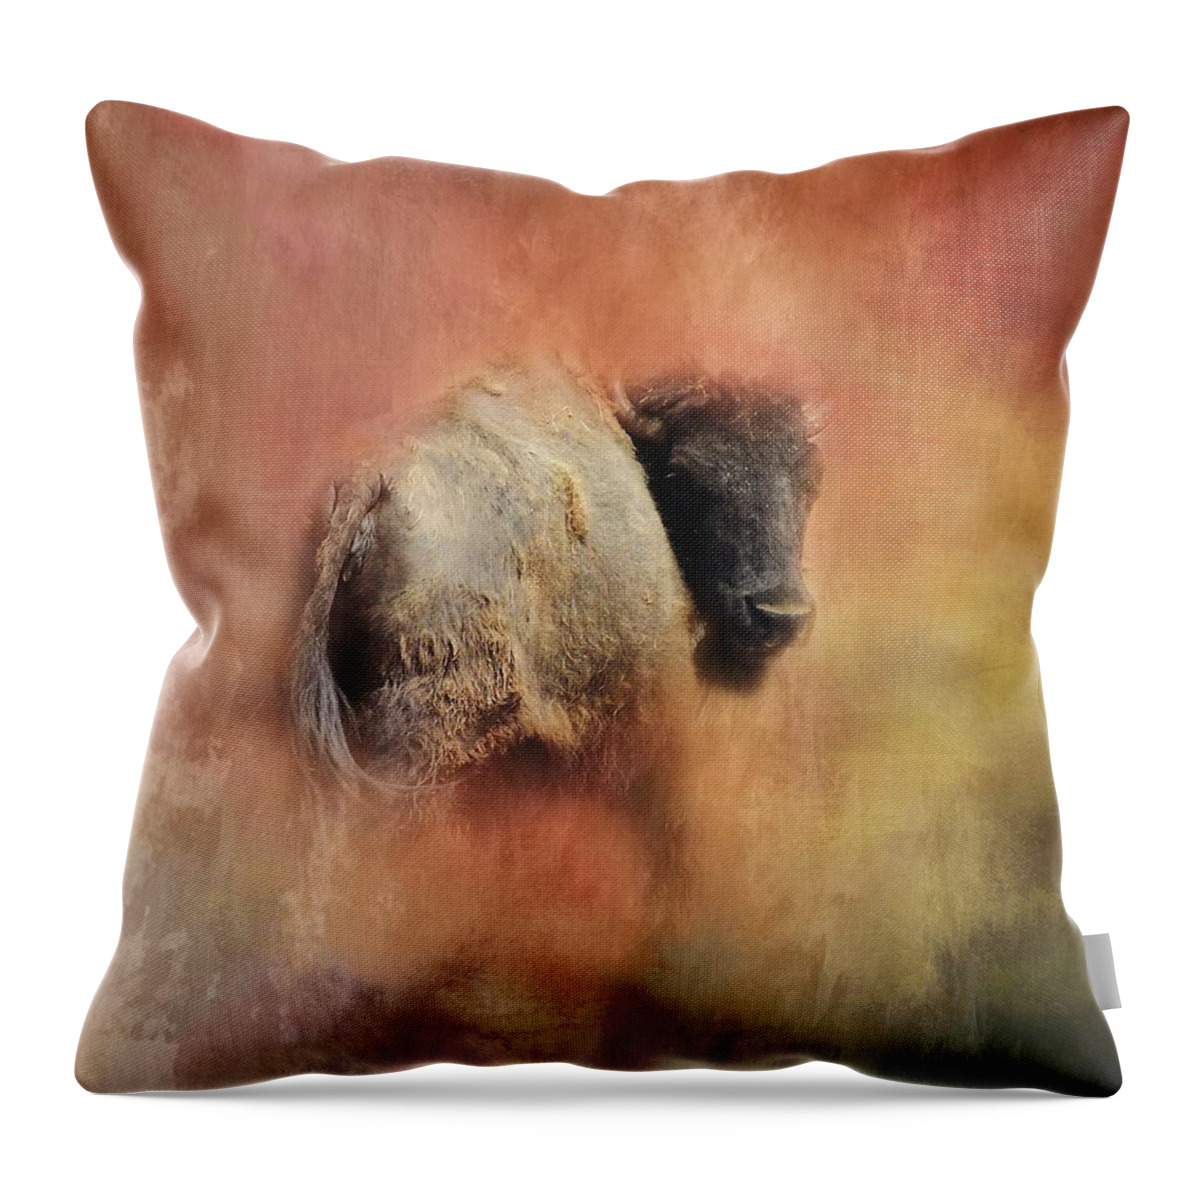 Buffalo Throw Pillow featuring the photograph Young Buffalo by Marjorie Whitley